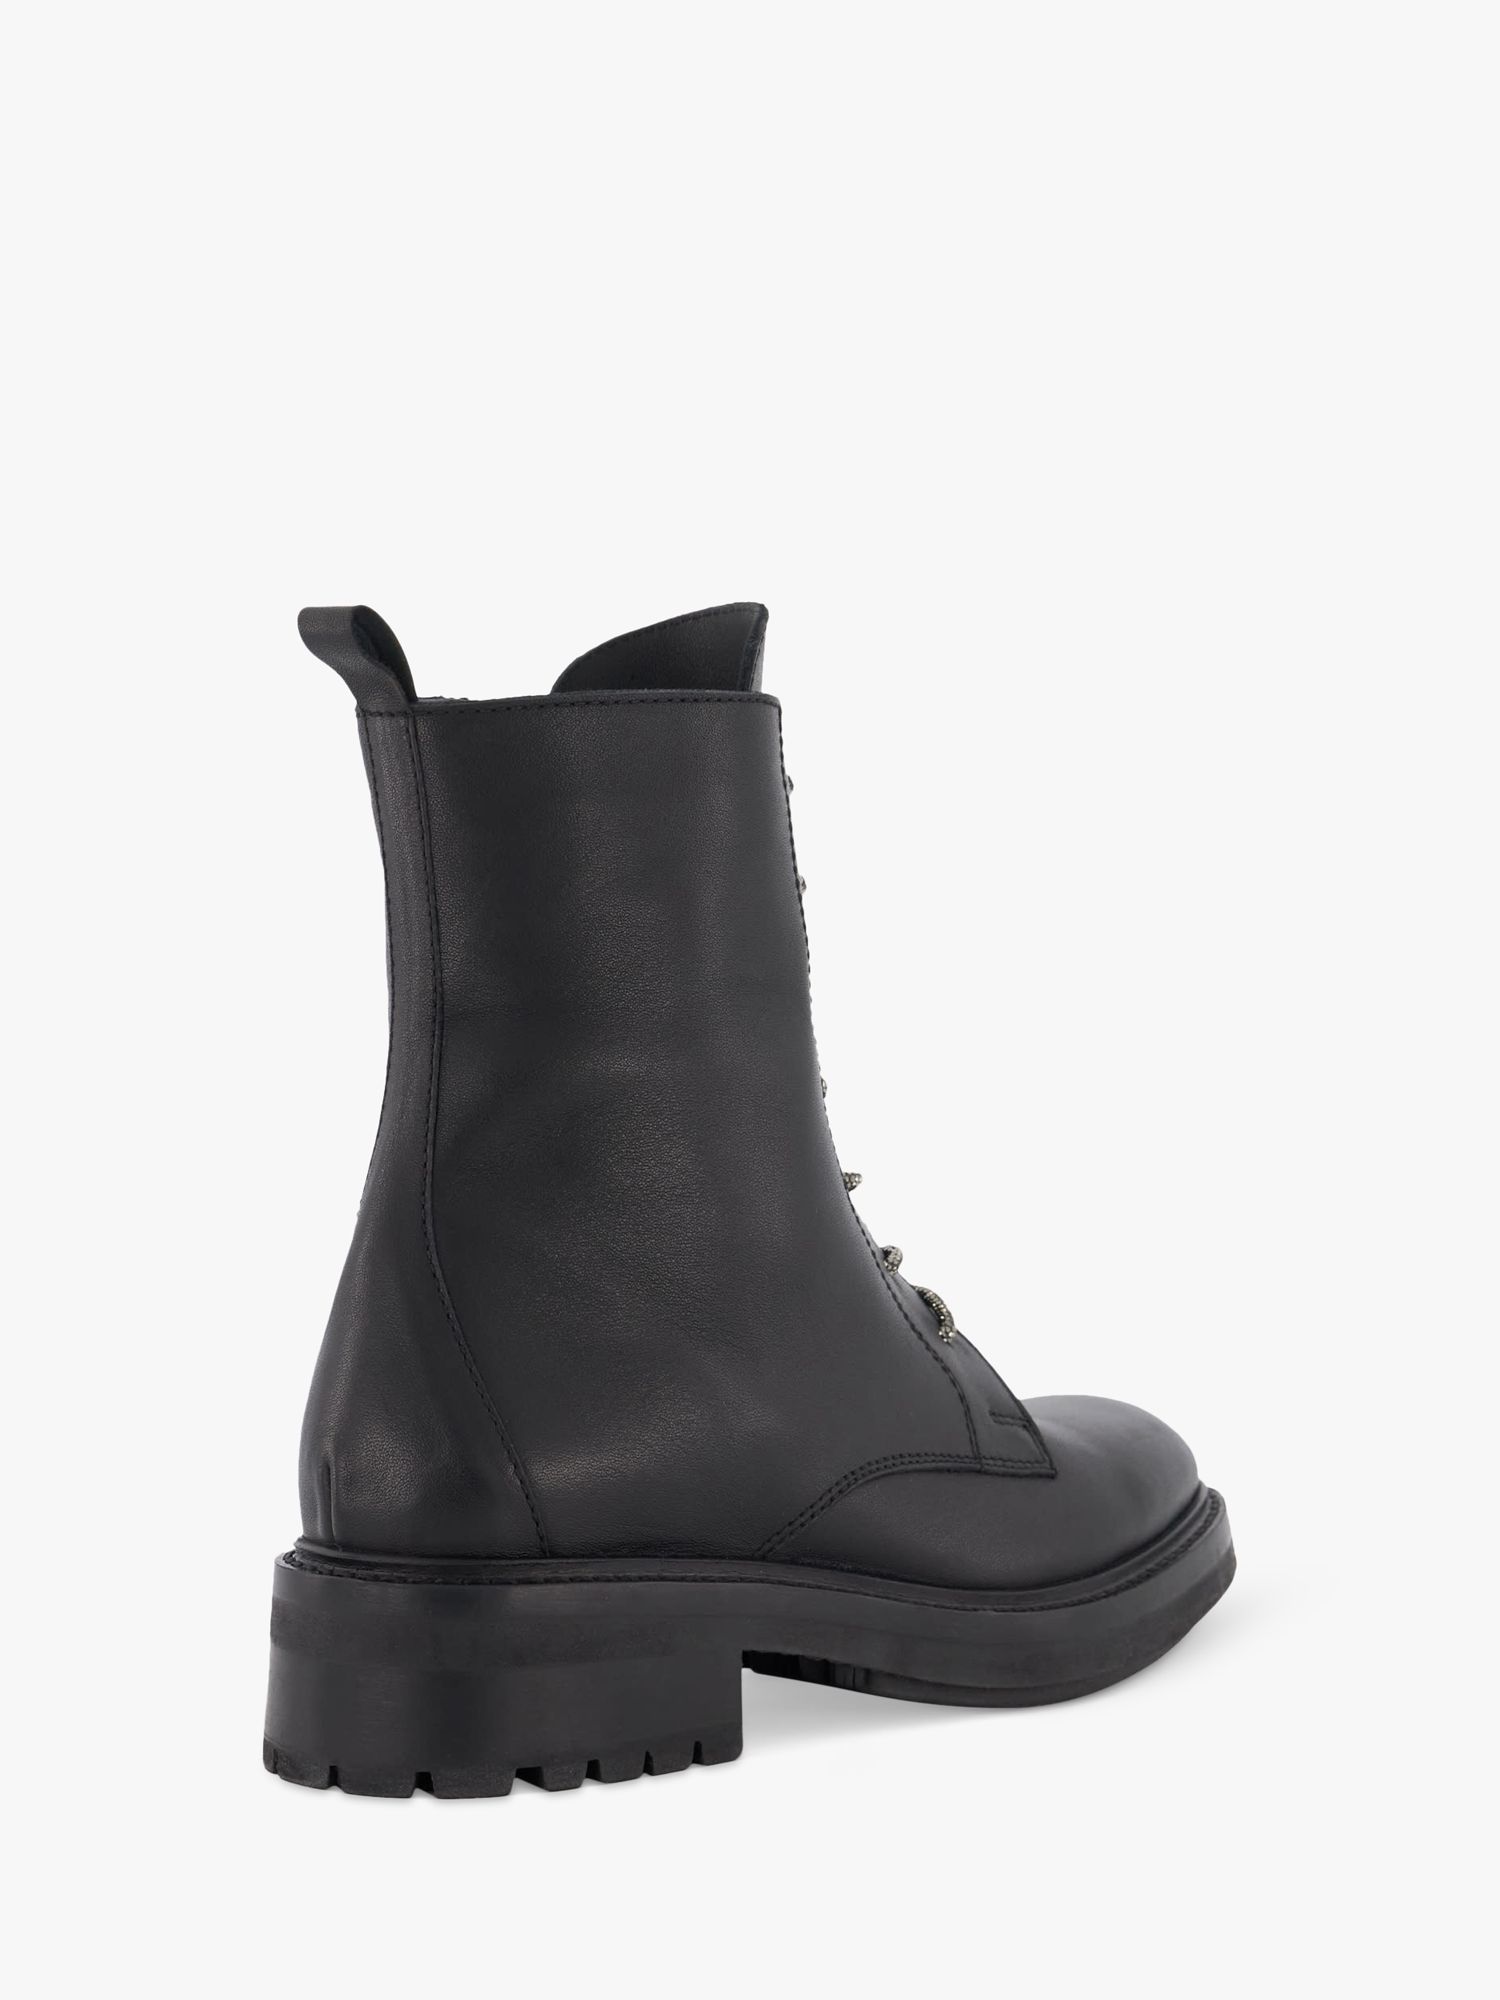 Buy Dune Purplex Leather Ankle Boots, Black Online at johnlewis.com